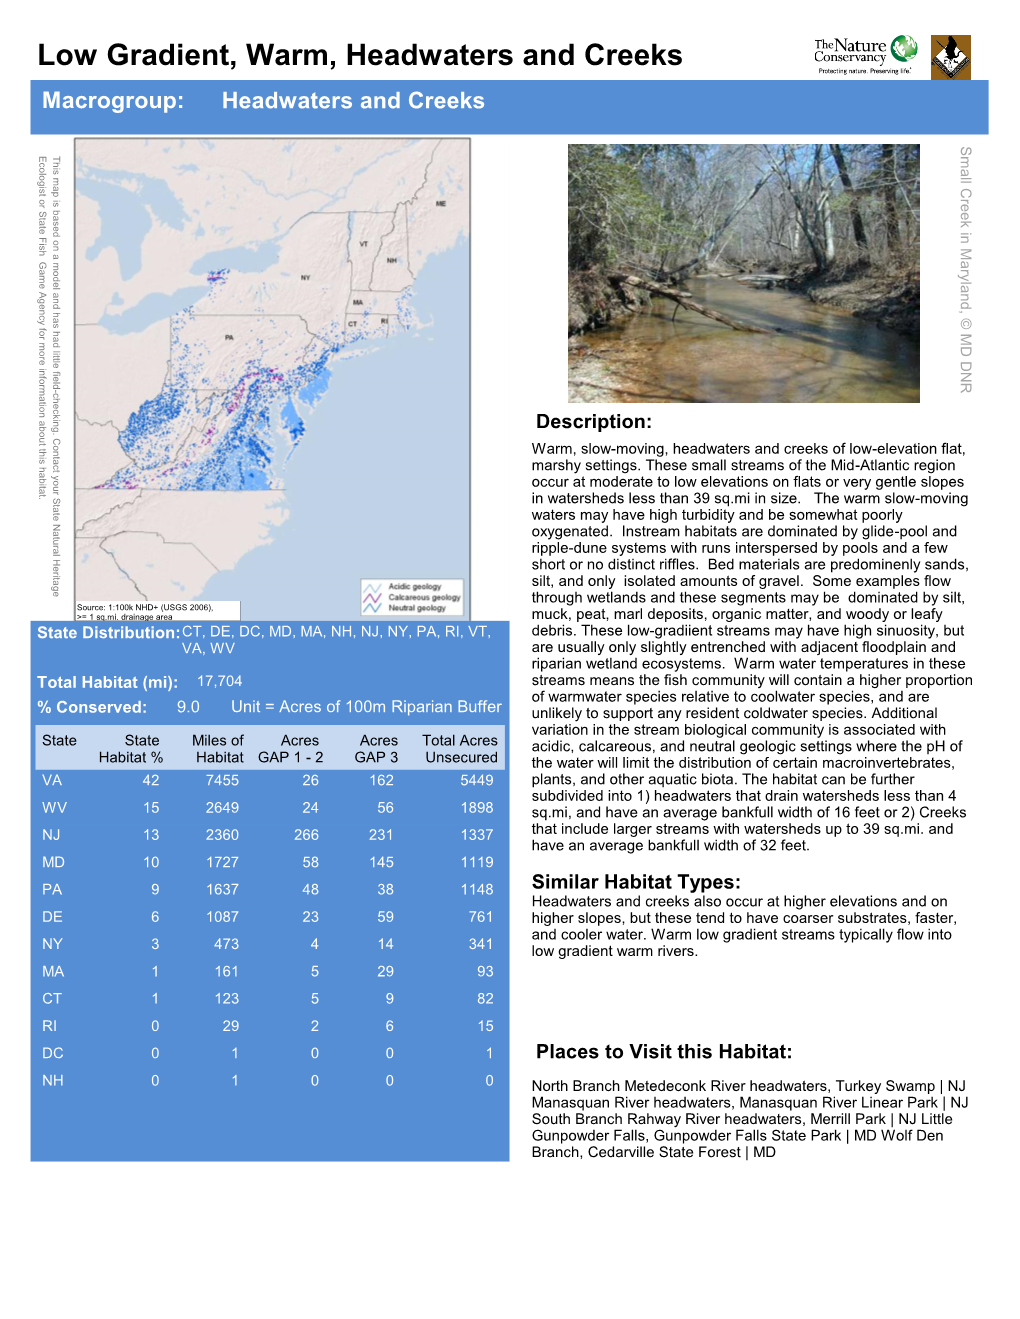 Low Gradient, Warm, Headwaters and Creeks Macrogroup: Headwaters and Creeks